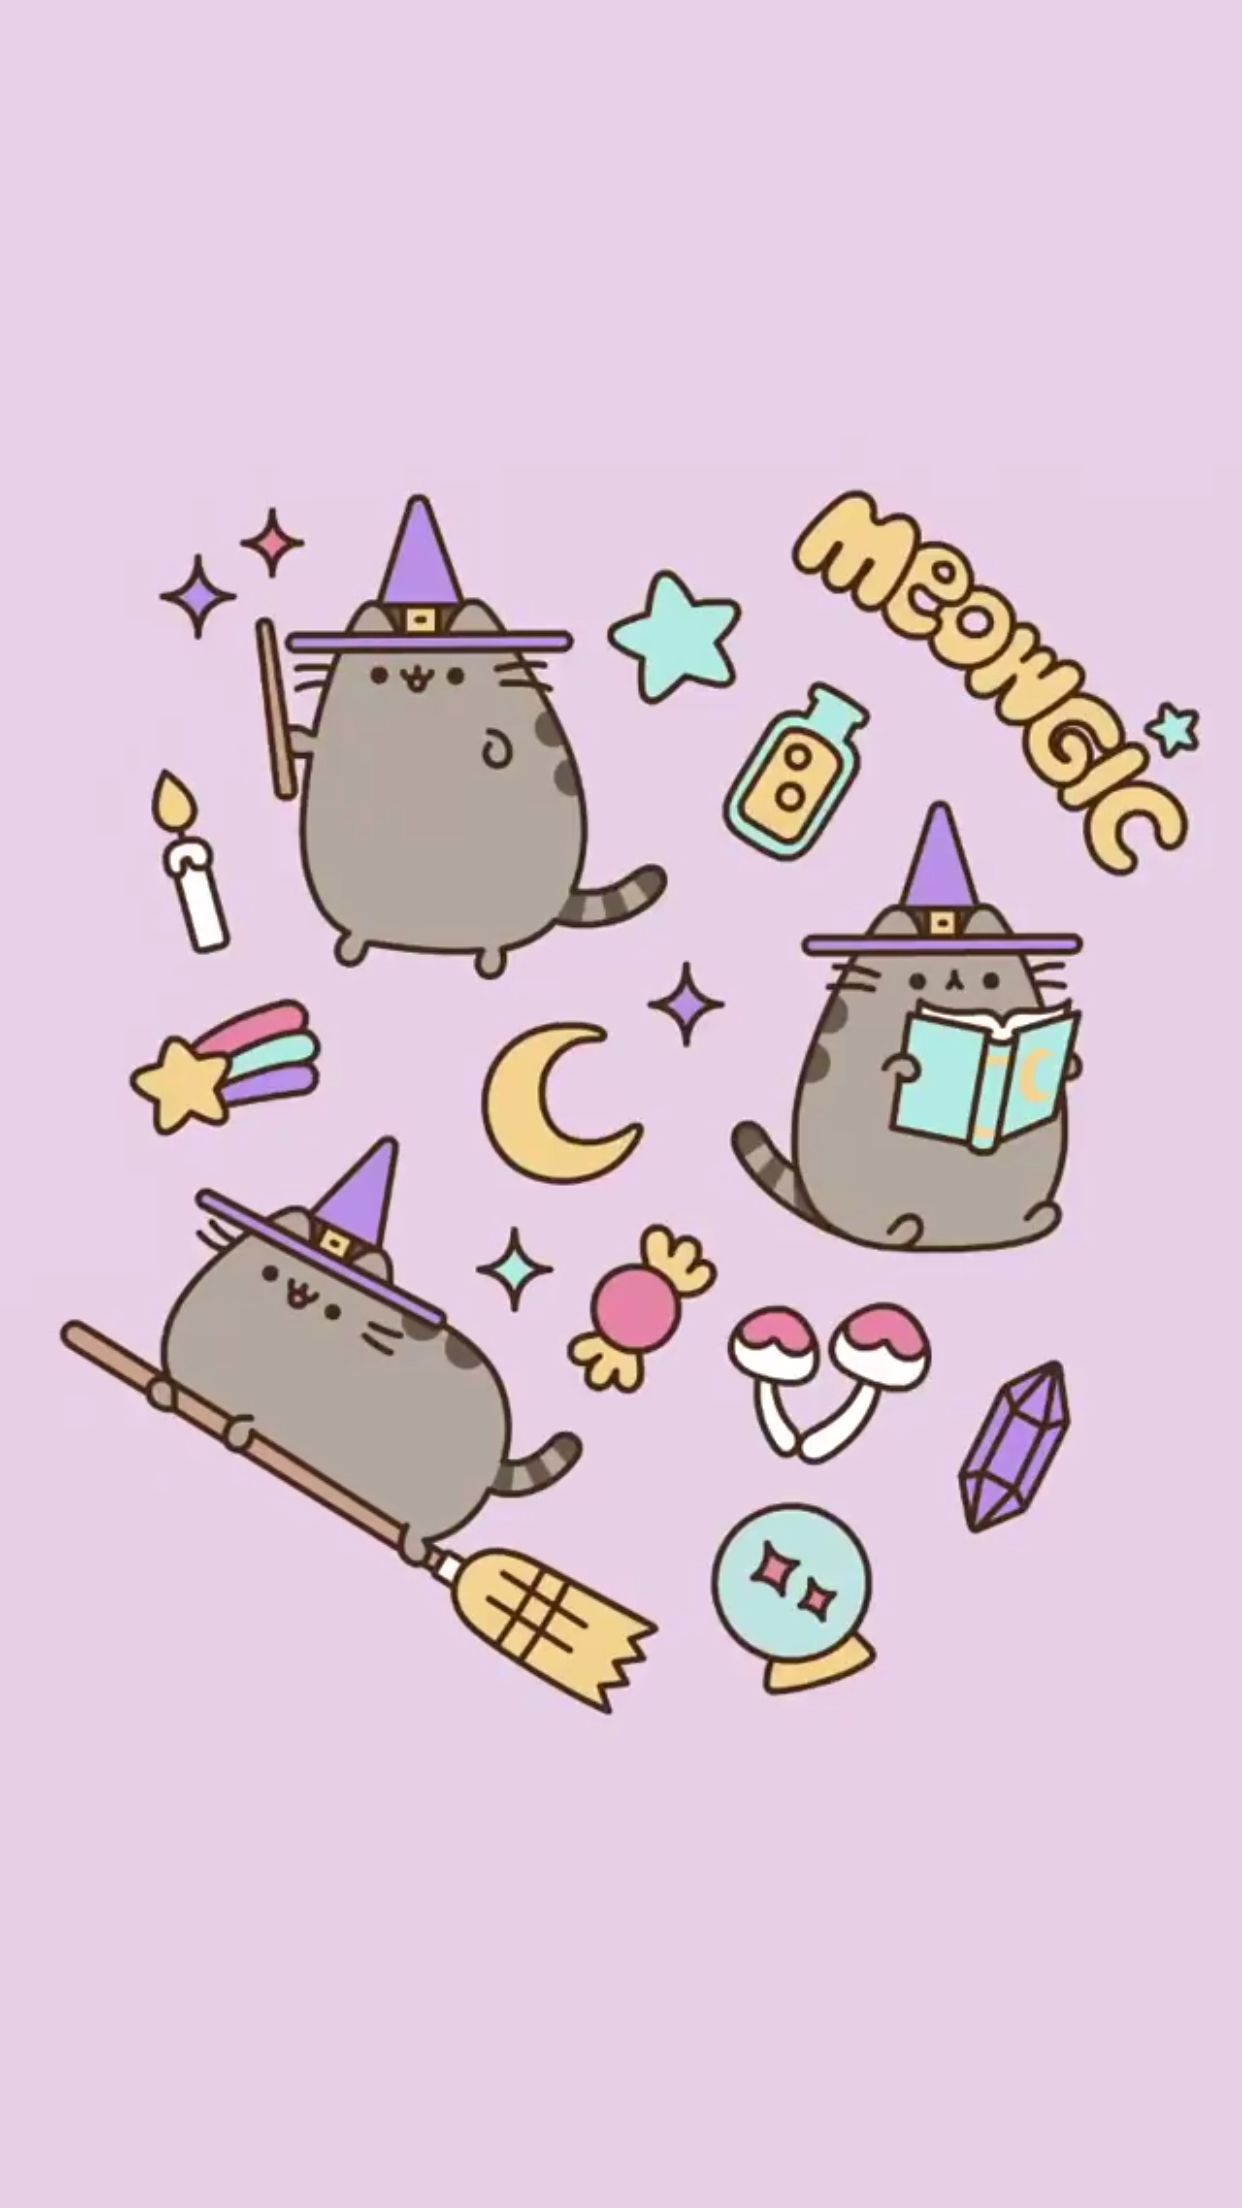 pusheen halloween witch wallpaper ♡. Witch wallpaper, Cute wallpaper, Witchy wallpaper